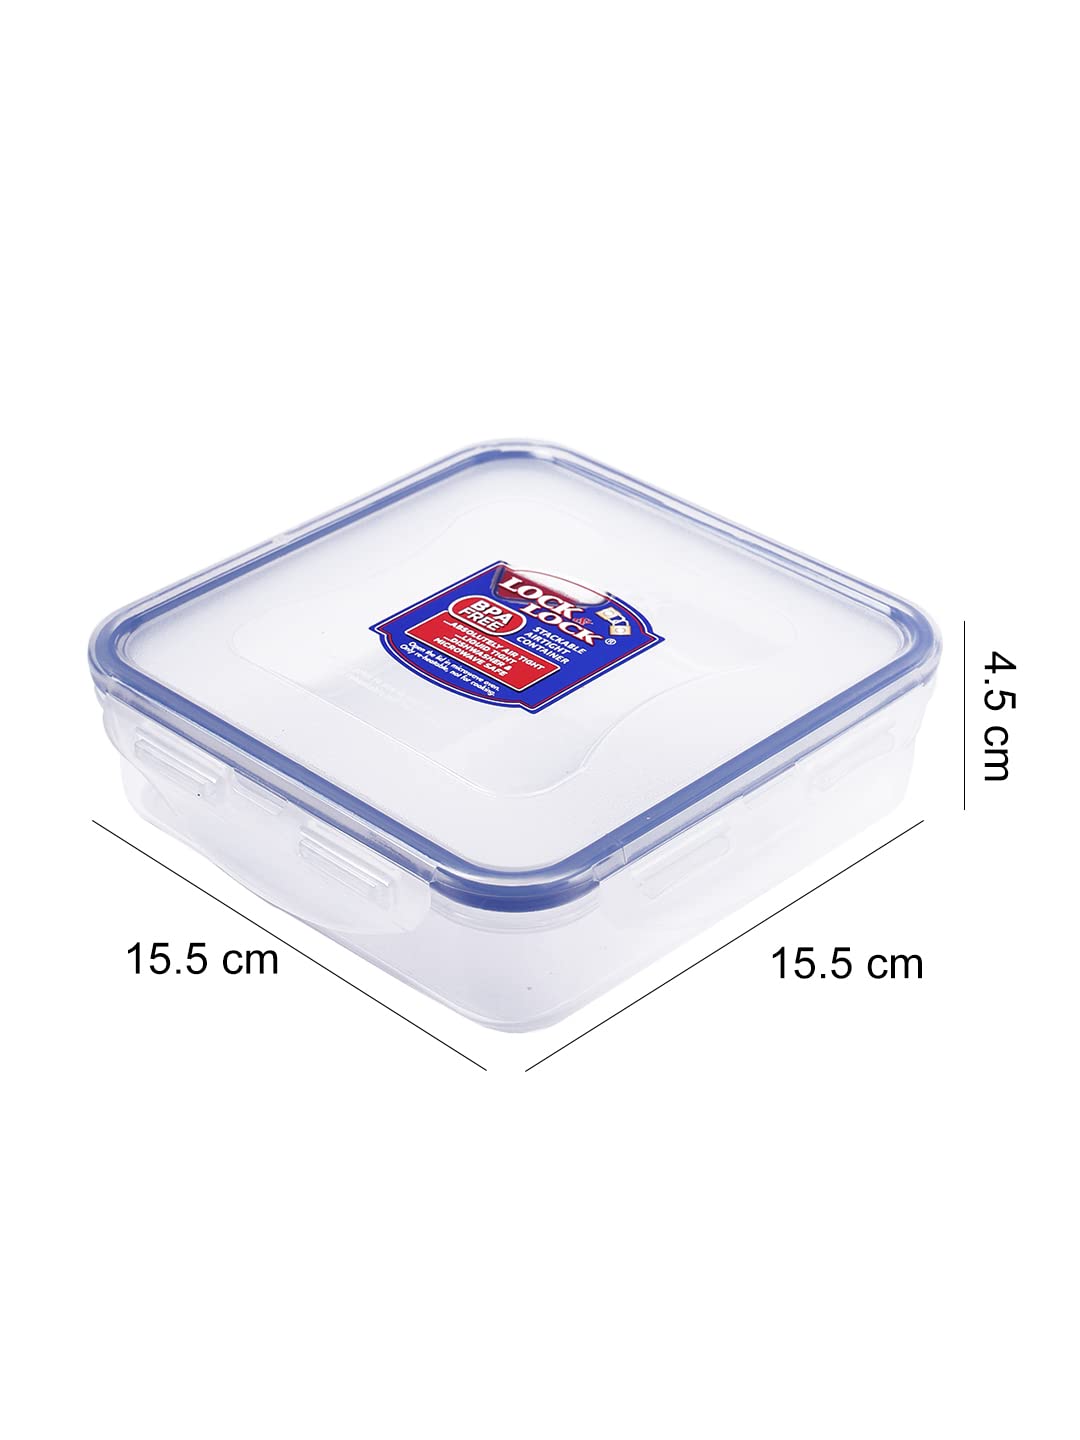 LOCK & LOCK 20-Fluid Ounce Square Food Container, Short, 2-1/2-Cup